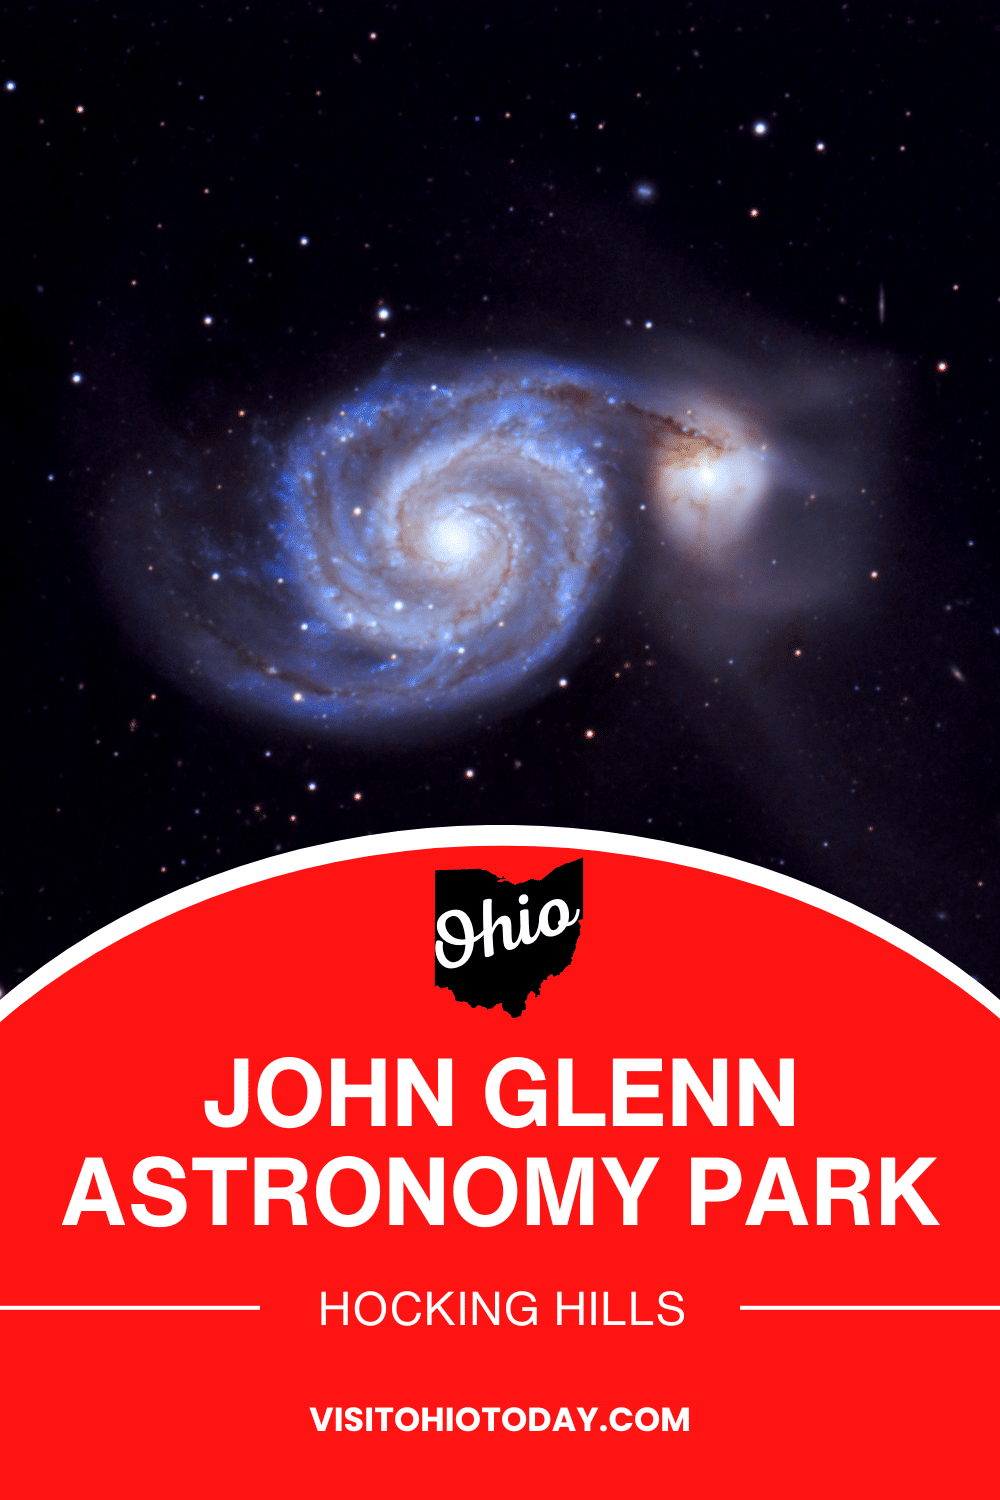 Throughout history, people have been fascinated by the night sky full of stars. John Glenn Astronomy Park is in Hocking Hills State Park, one of the few areas of Ohio where the night sky can be seen clearly without the interference of man-made light.